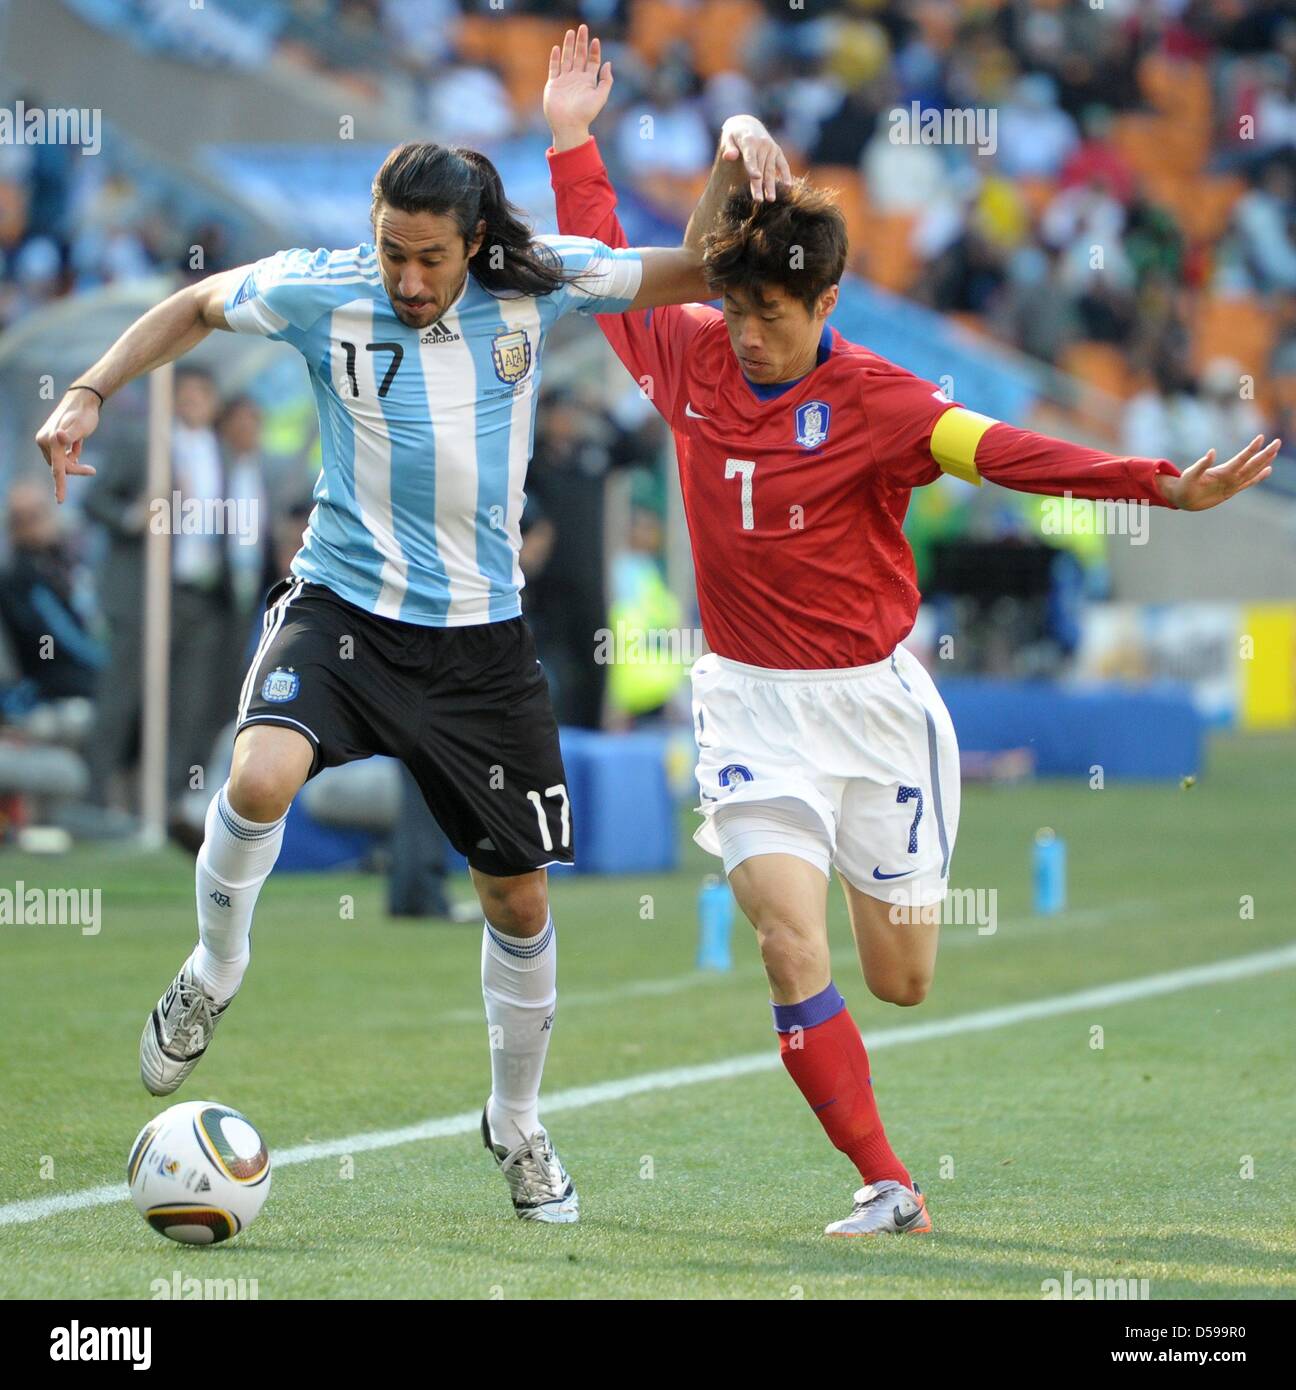 Jonas Gutierrez (L) of Argentina vies with Park Ji Sung (R) of South Korea during the FIFA World Cup 2010 group B match between Argentina and South Korea at Soccer City Stadium in Johannesburg, South Africa 17 June 2010. Photo: Ronald Wittek dpa - Please refer to http://dpaq.de/FIFA-WM2010-TC  +++(c) dpa - Bildfunk+++ Stock Photo